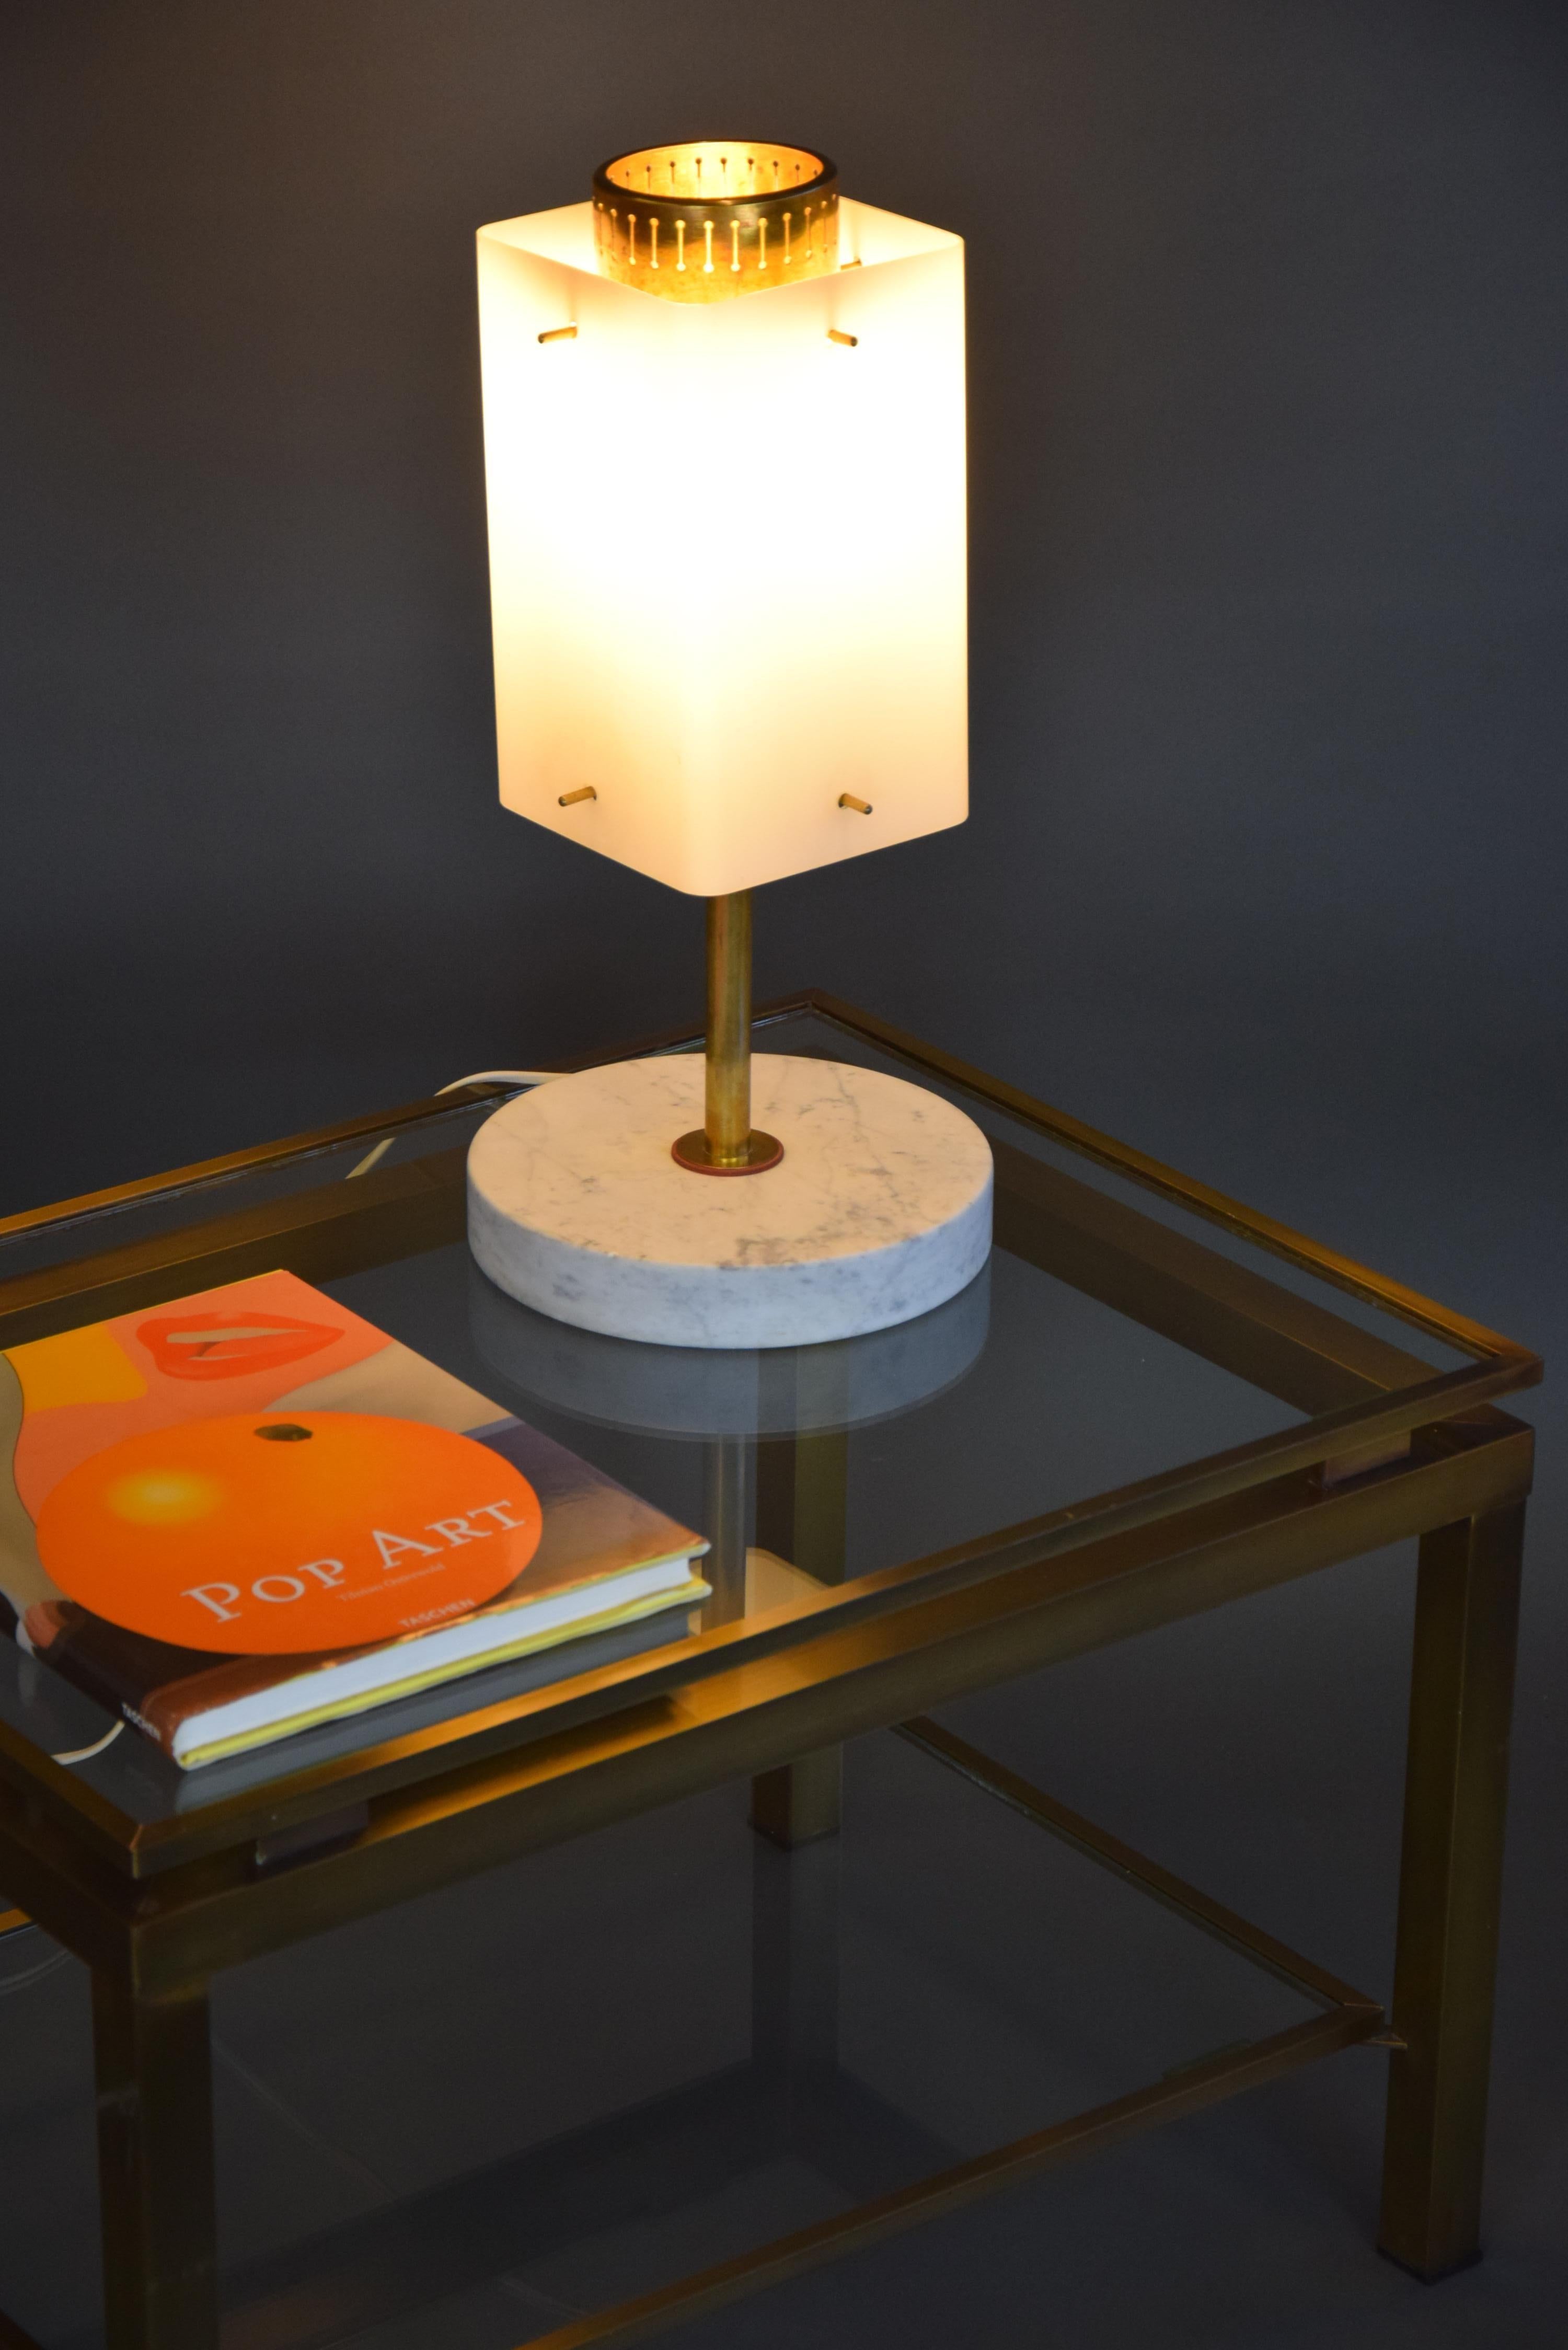 Stylish, elegant and classy Italian Mid-Century Modern opaline glass, brass and Carrera marble table lamp in great condition.
A jewel in just about every interior, living room, study or bedroom.

This beauty will be shipped by us insured overseas in